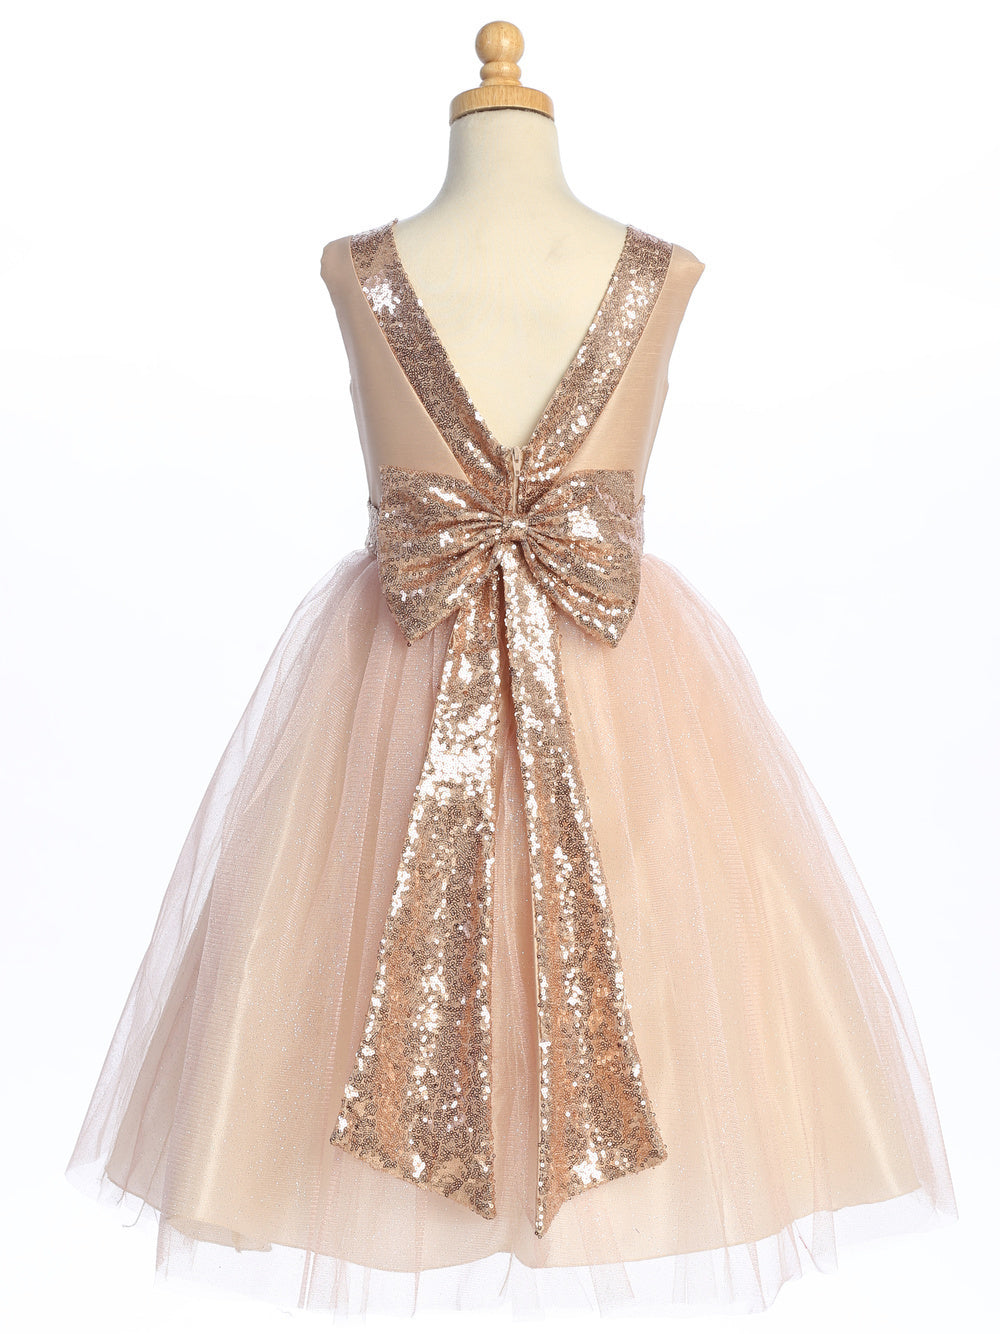 Blush Pink Shantung and Sparkle Tulle Dress with Sequin Sash - BL255-BLSH